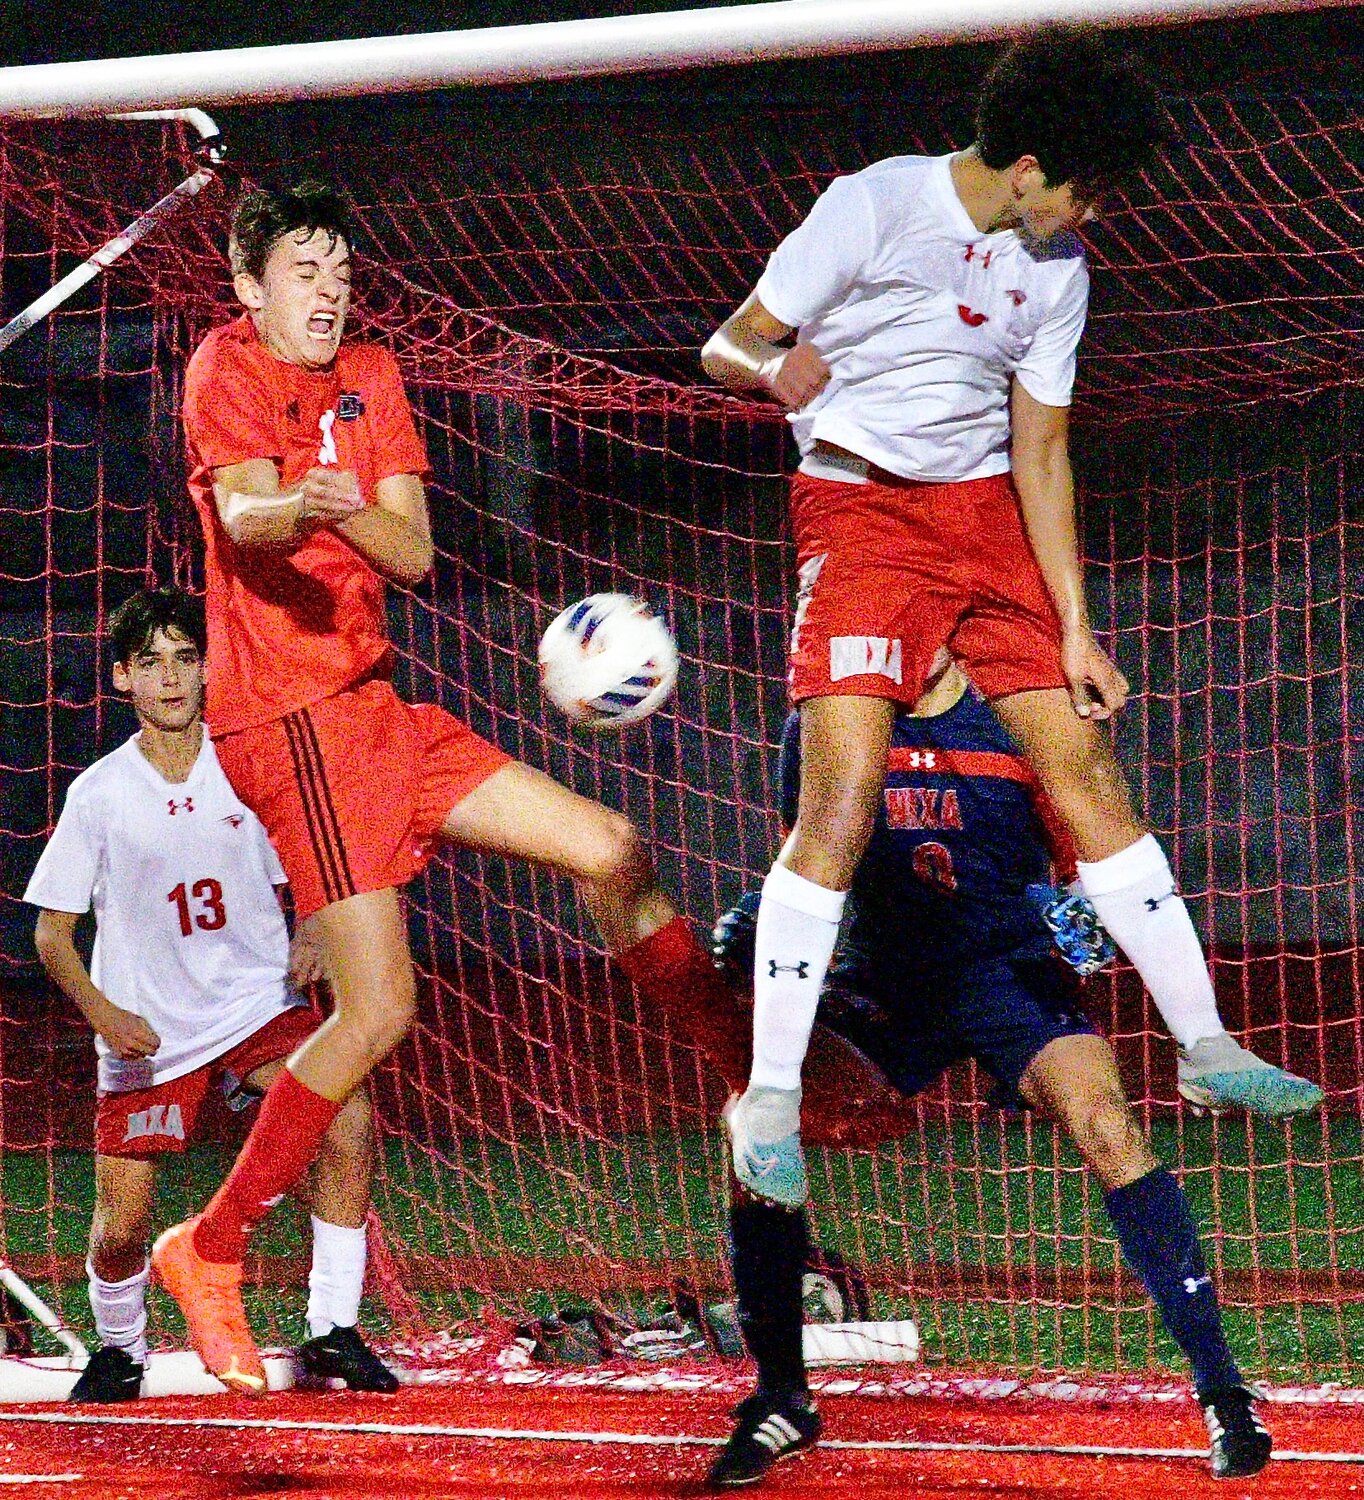 OZARK'S JAKE GARNER receive a pass in front of the Tigers' goal.